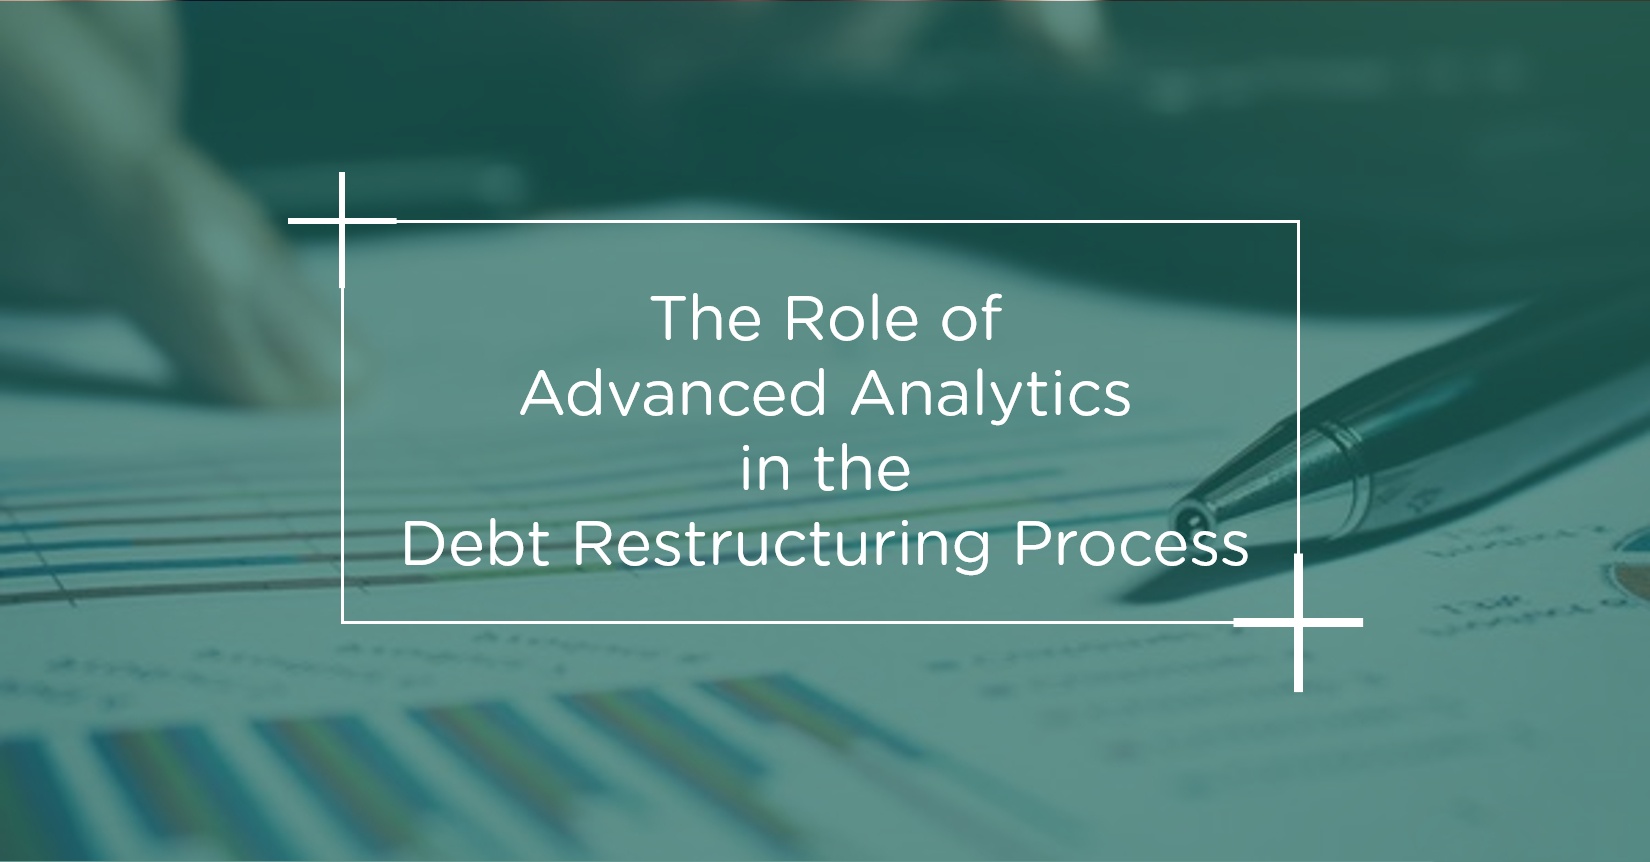 The Role of Advanced Analytics in the Debt Restructuring Process